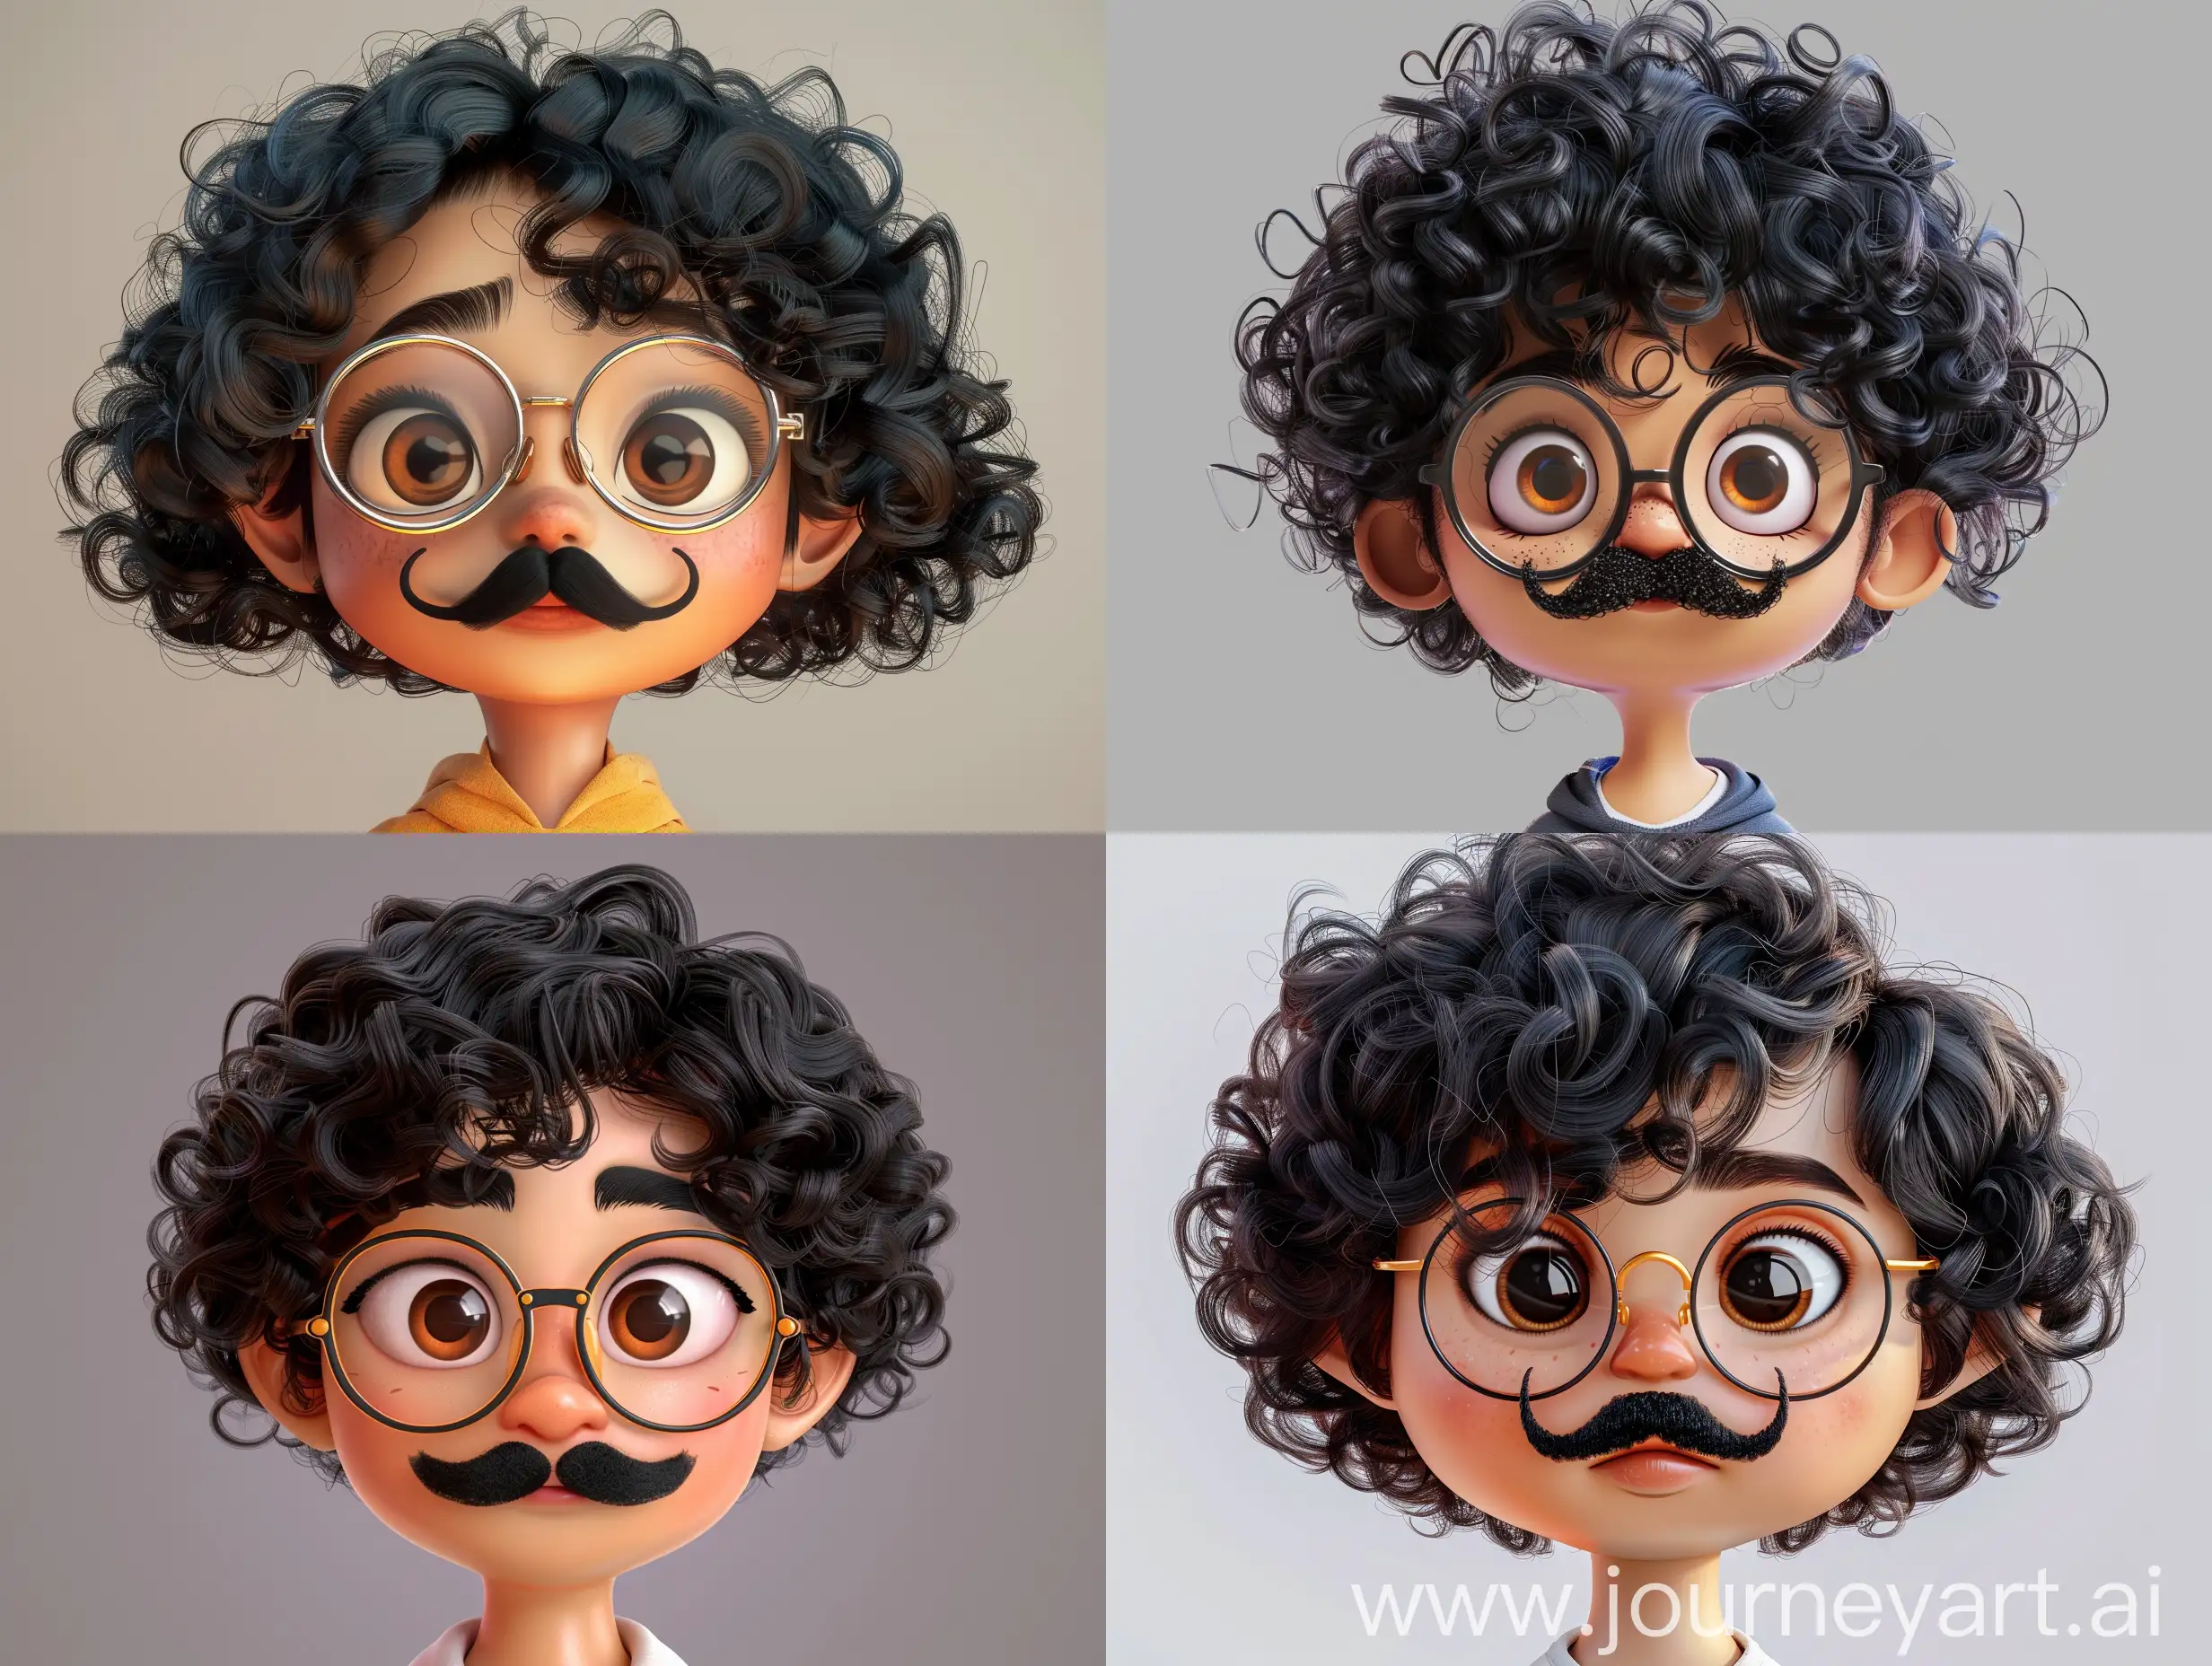 a youthful and charming 2D animation-style Persian character representing a 16-year-old with curly black hair, warm brown eyes, wearing modern glasses. Make sure the character has a black moustache, light facial hair, and features a sweet, kind expression. The character should be dressed in an age-appropriate, fantasy-inspired casual outfit, full body included, capturing the essence of Persian youthfulness and friendliness. The style should be vibrant, fresh, and approachabl , it should also have a full and visiable body